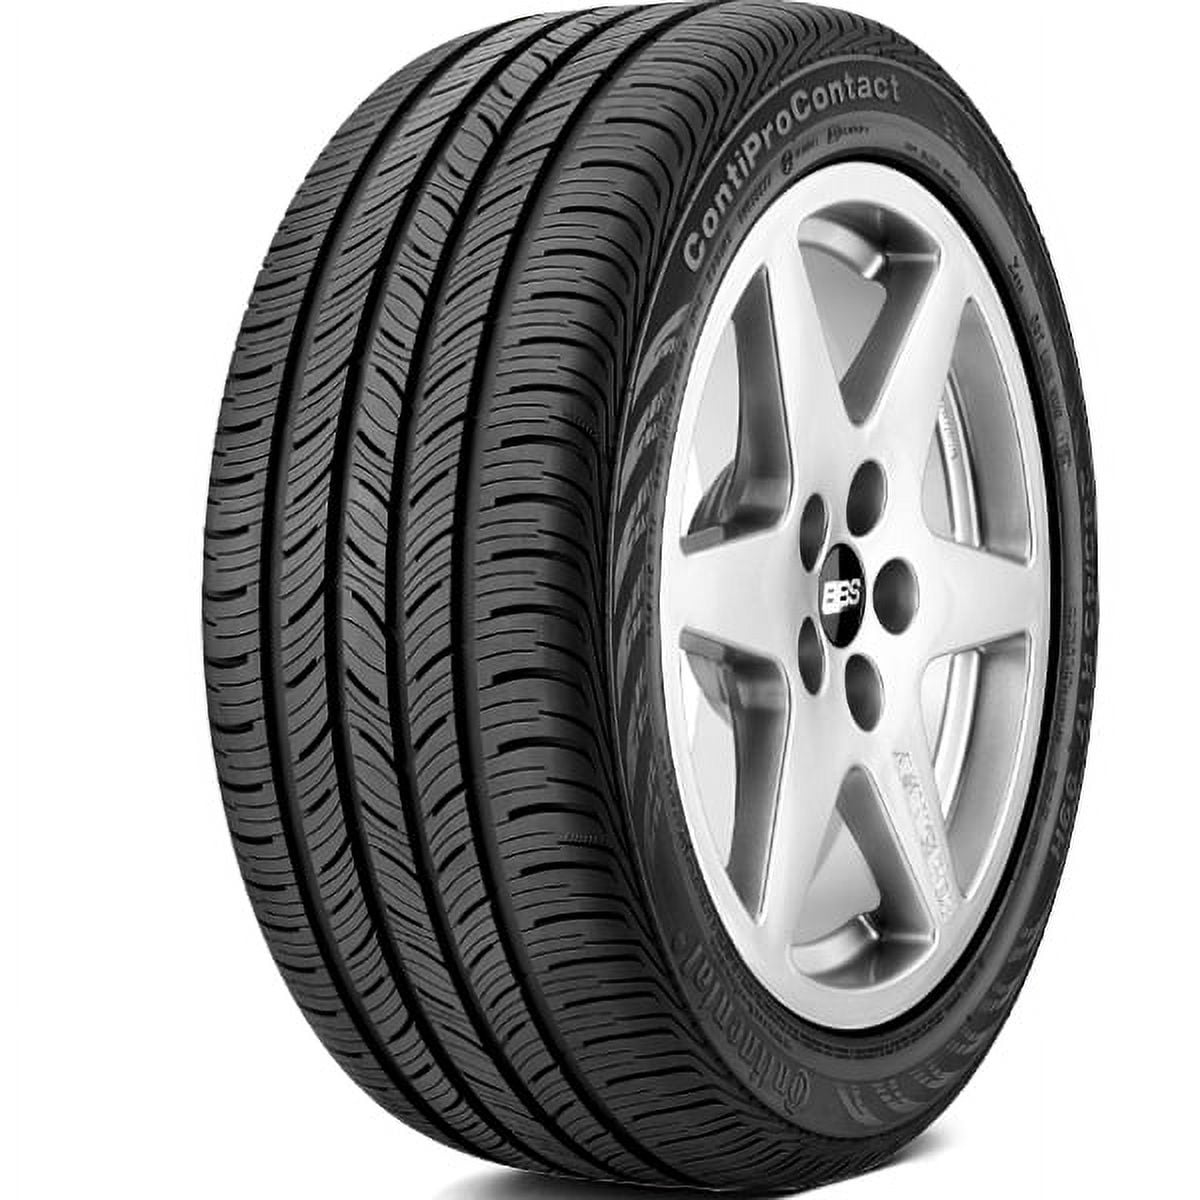 Season ContiProContact Tire P205/65R16 Continental All 95H BSW